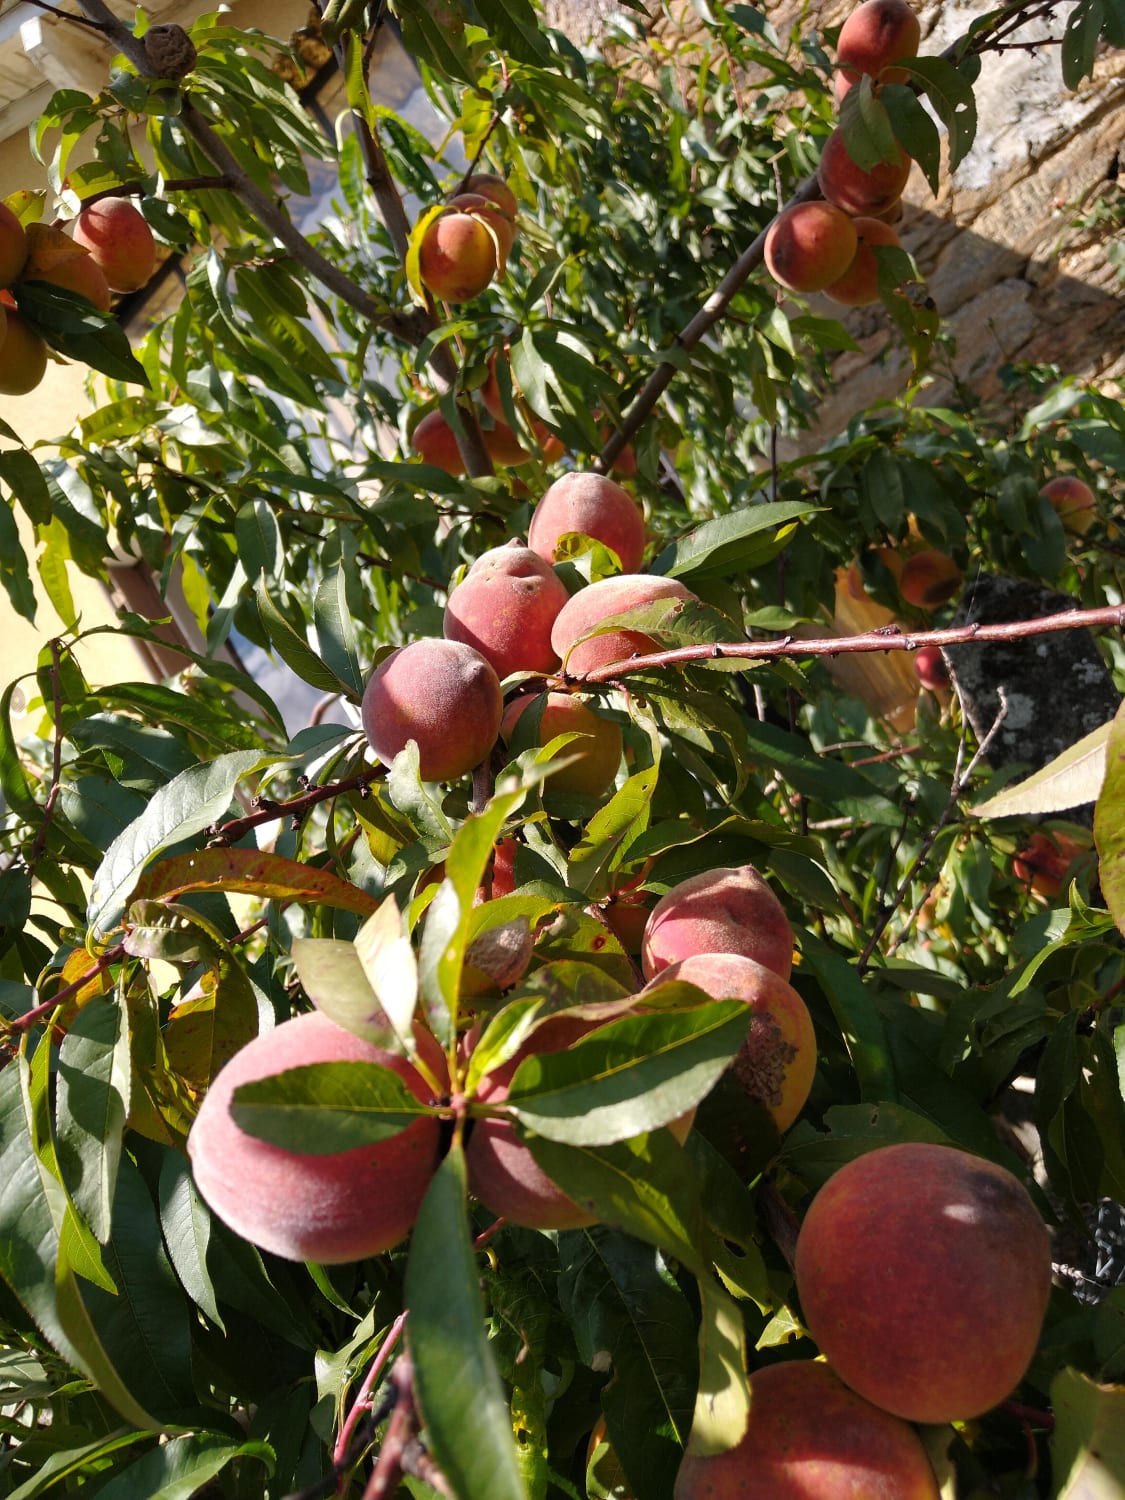 What would/do you do with millions of peaches? Looking for ideas, suggestions, recipes :-)